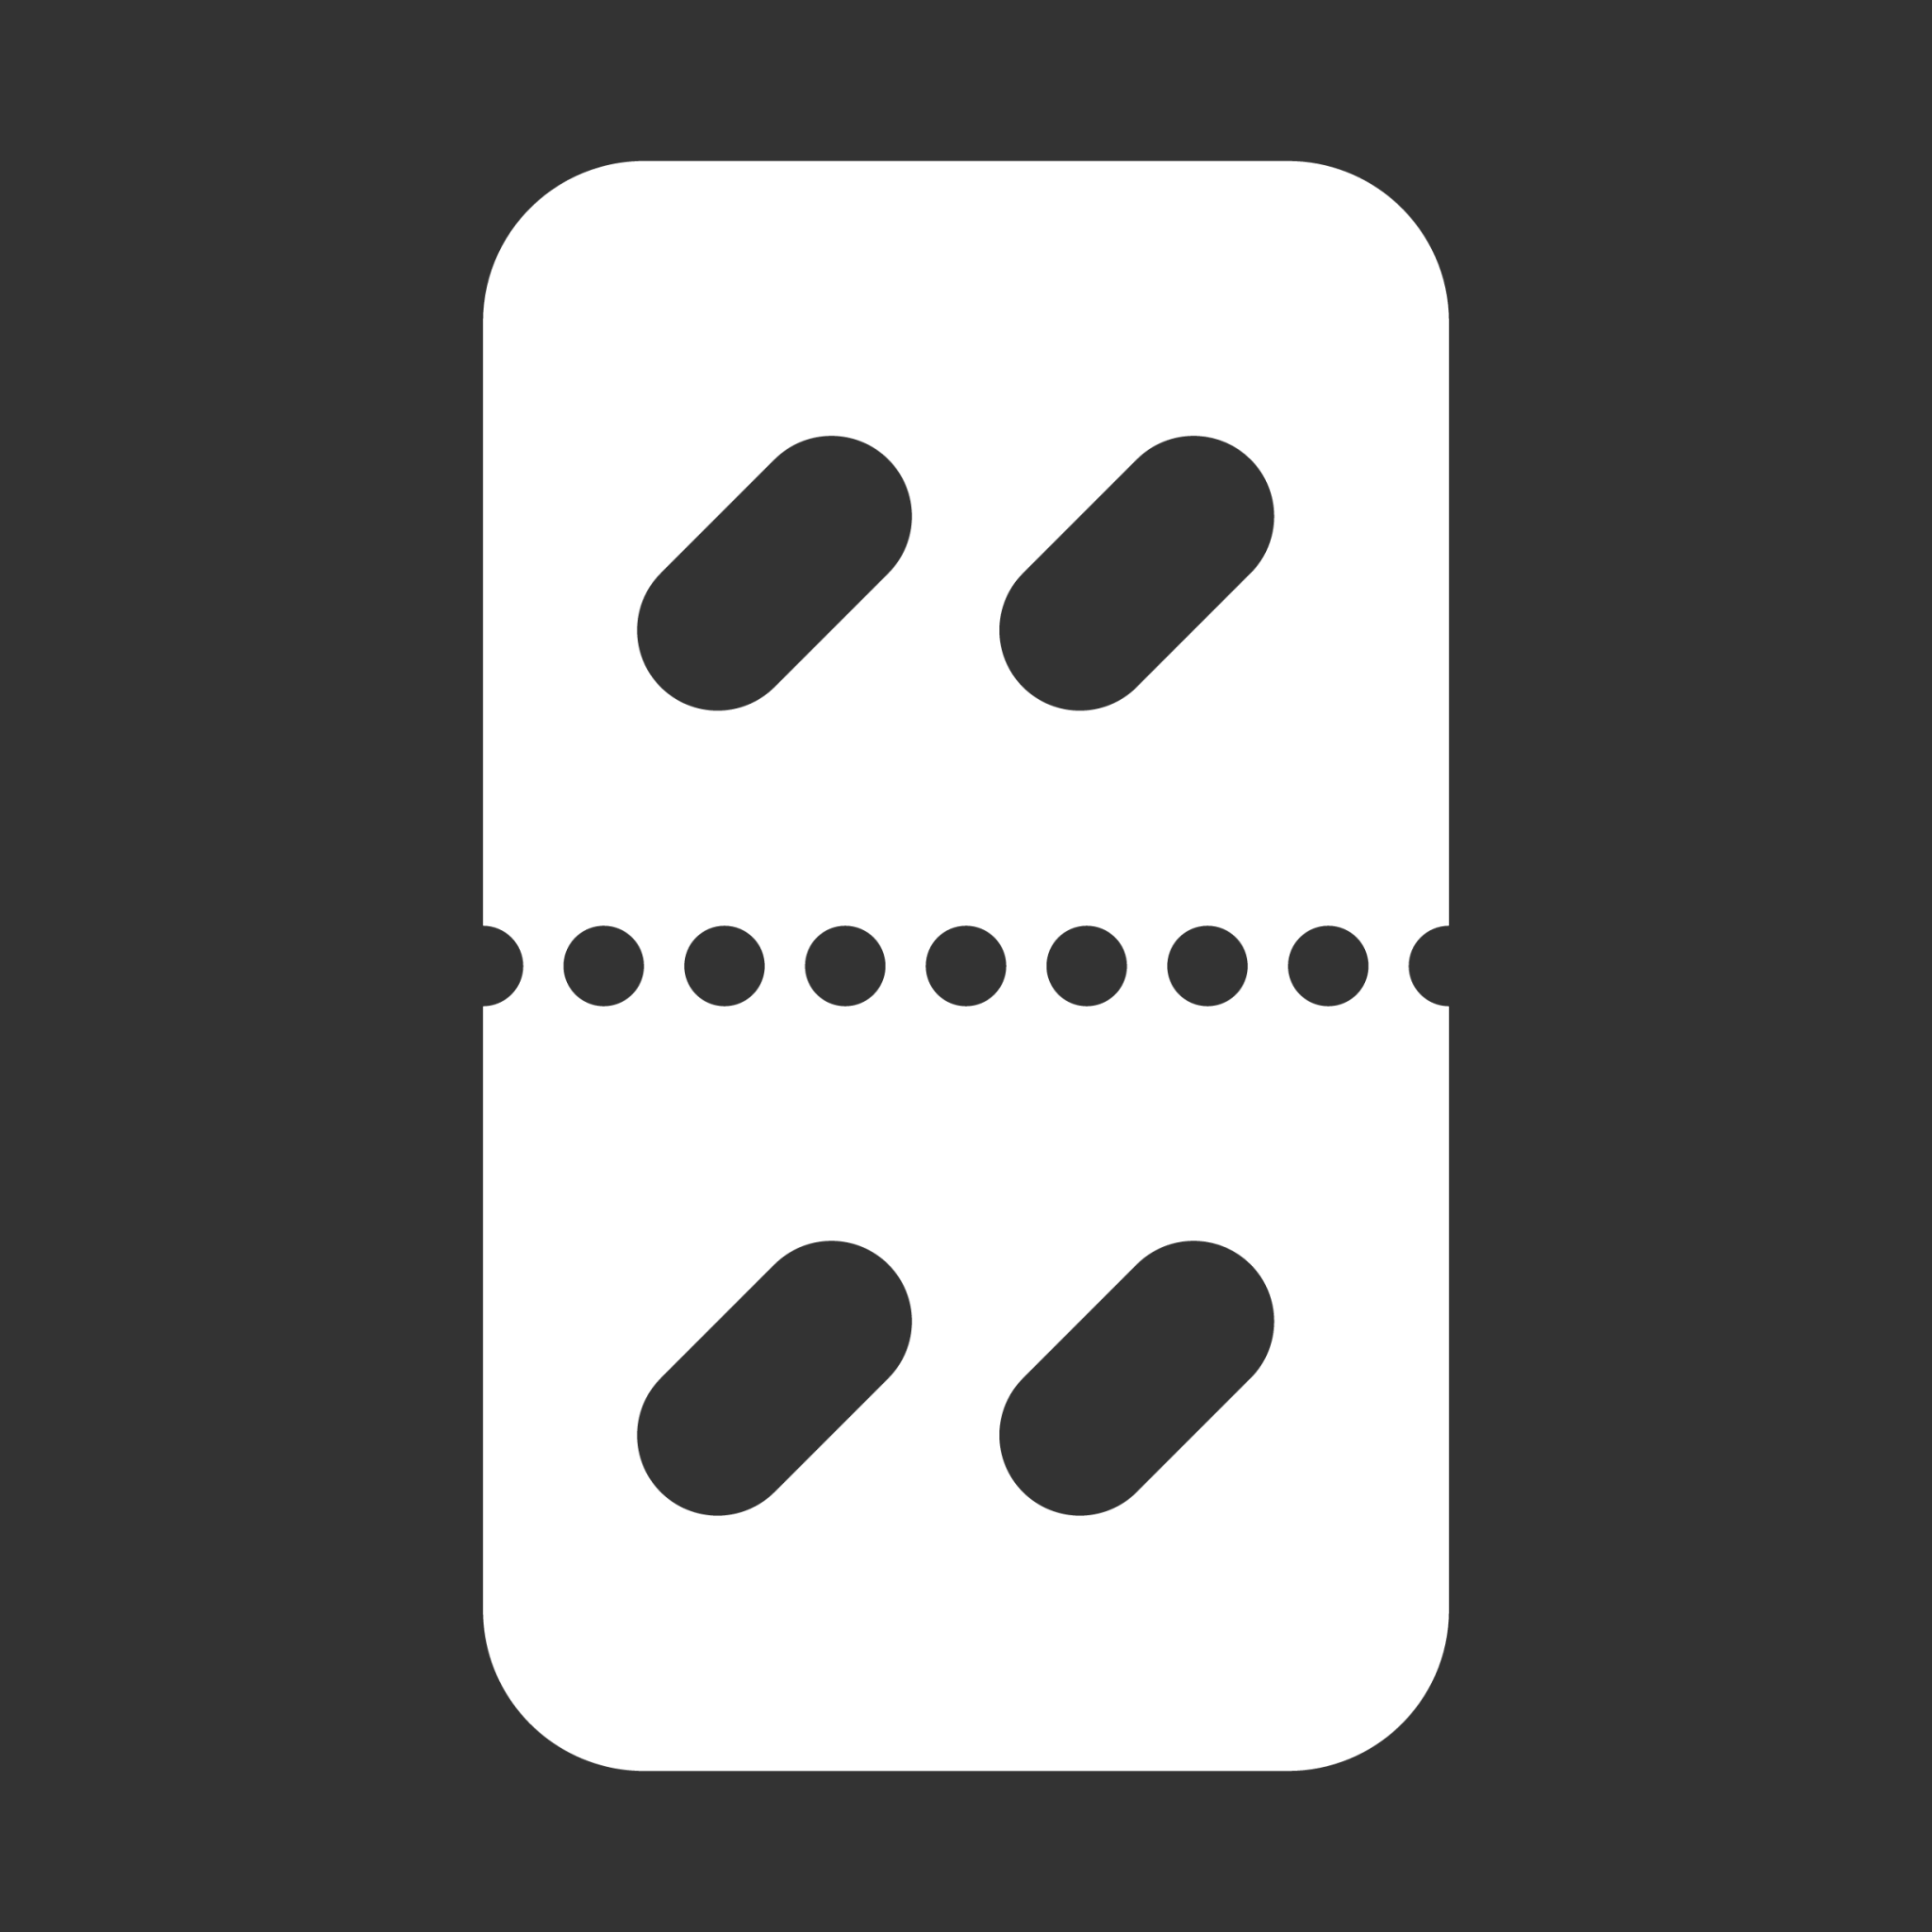 Blister Pills Oval x4 icon